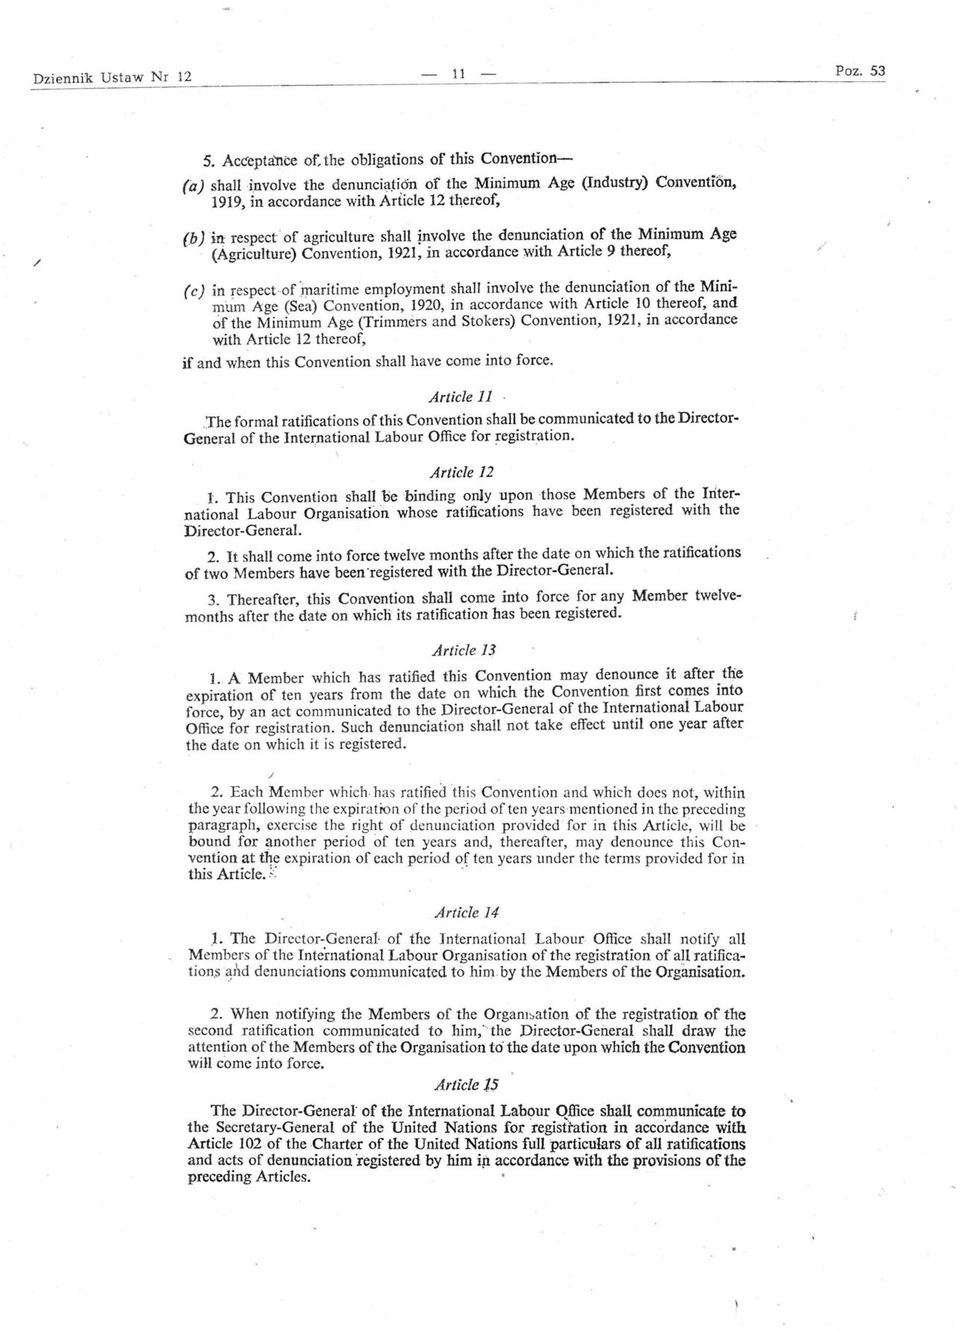 1921, in accordance :with Article 9 thereof, (c) in respecto(maritime employment shali involve the denunciation of the Minimum A:ge (Sea) Convention, 1920, in accordance with ArticIe 10 thereof, and